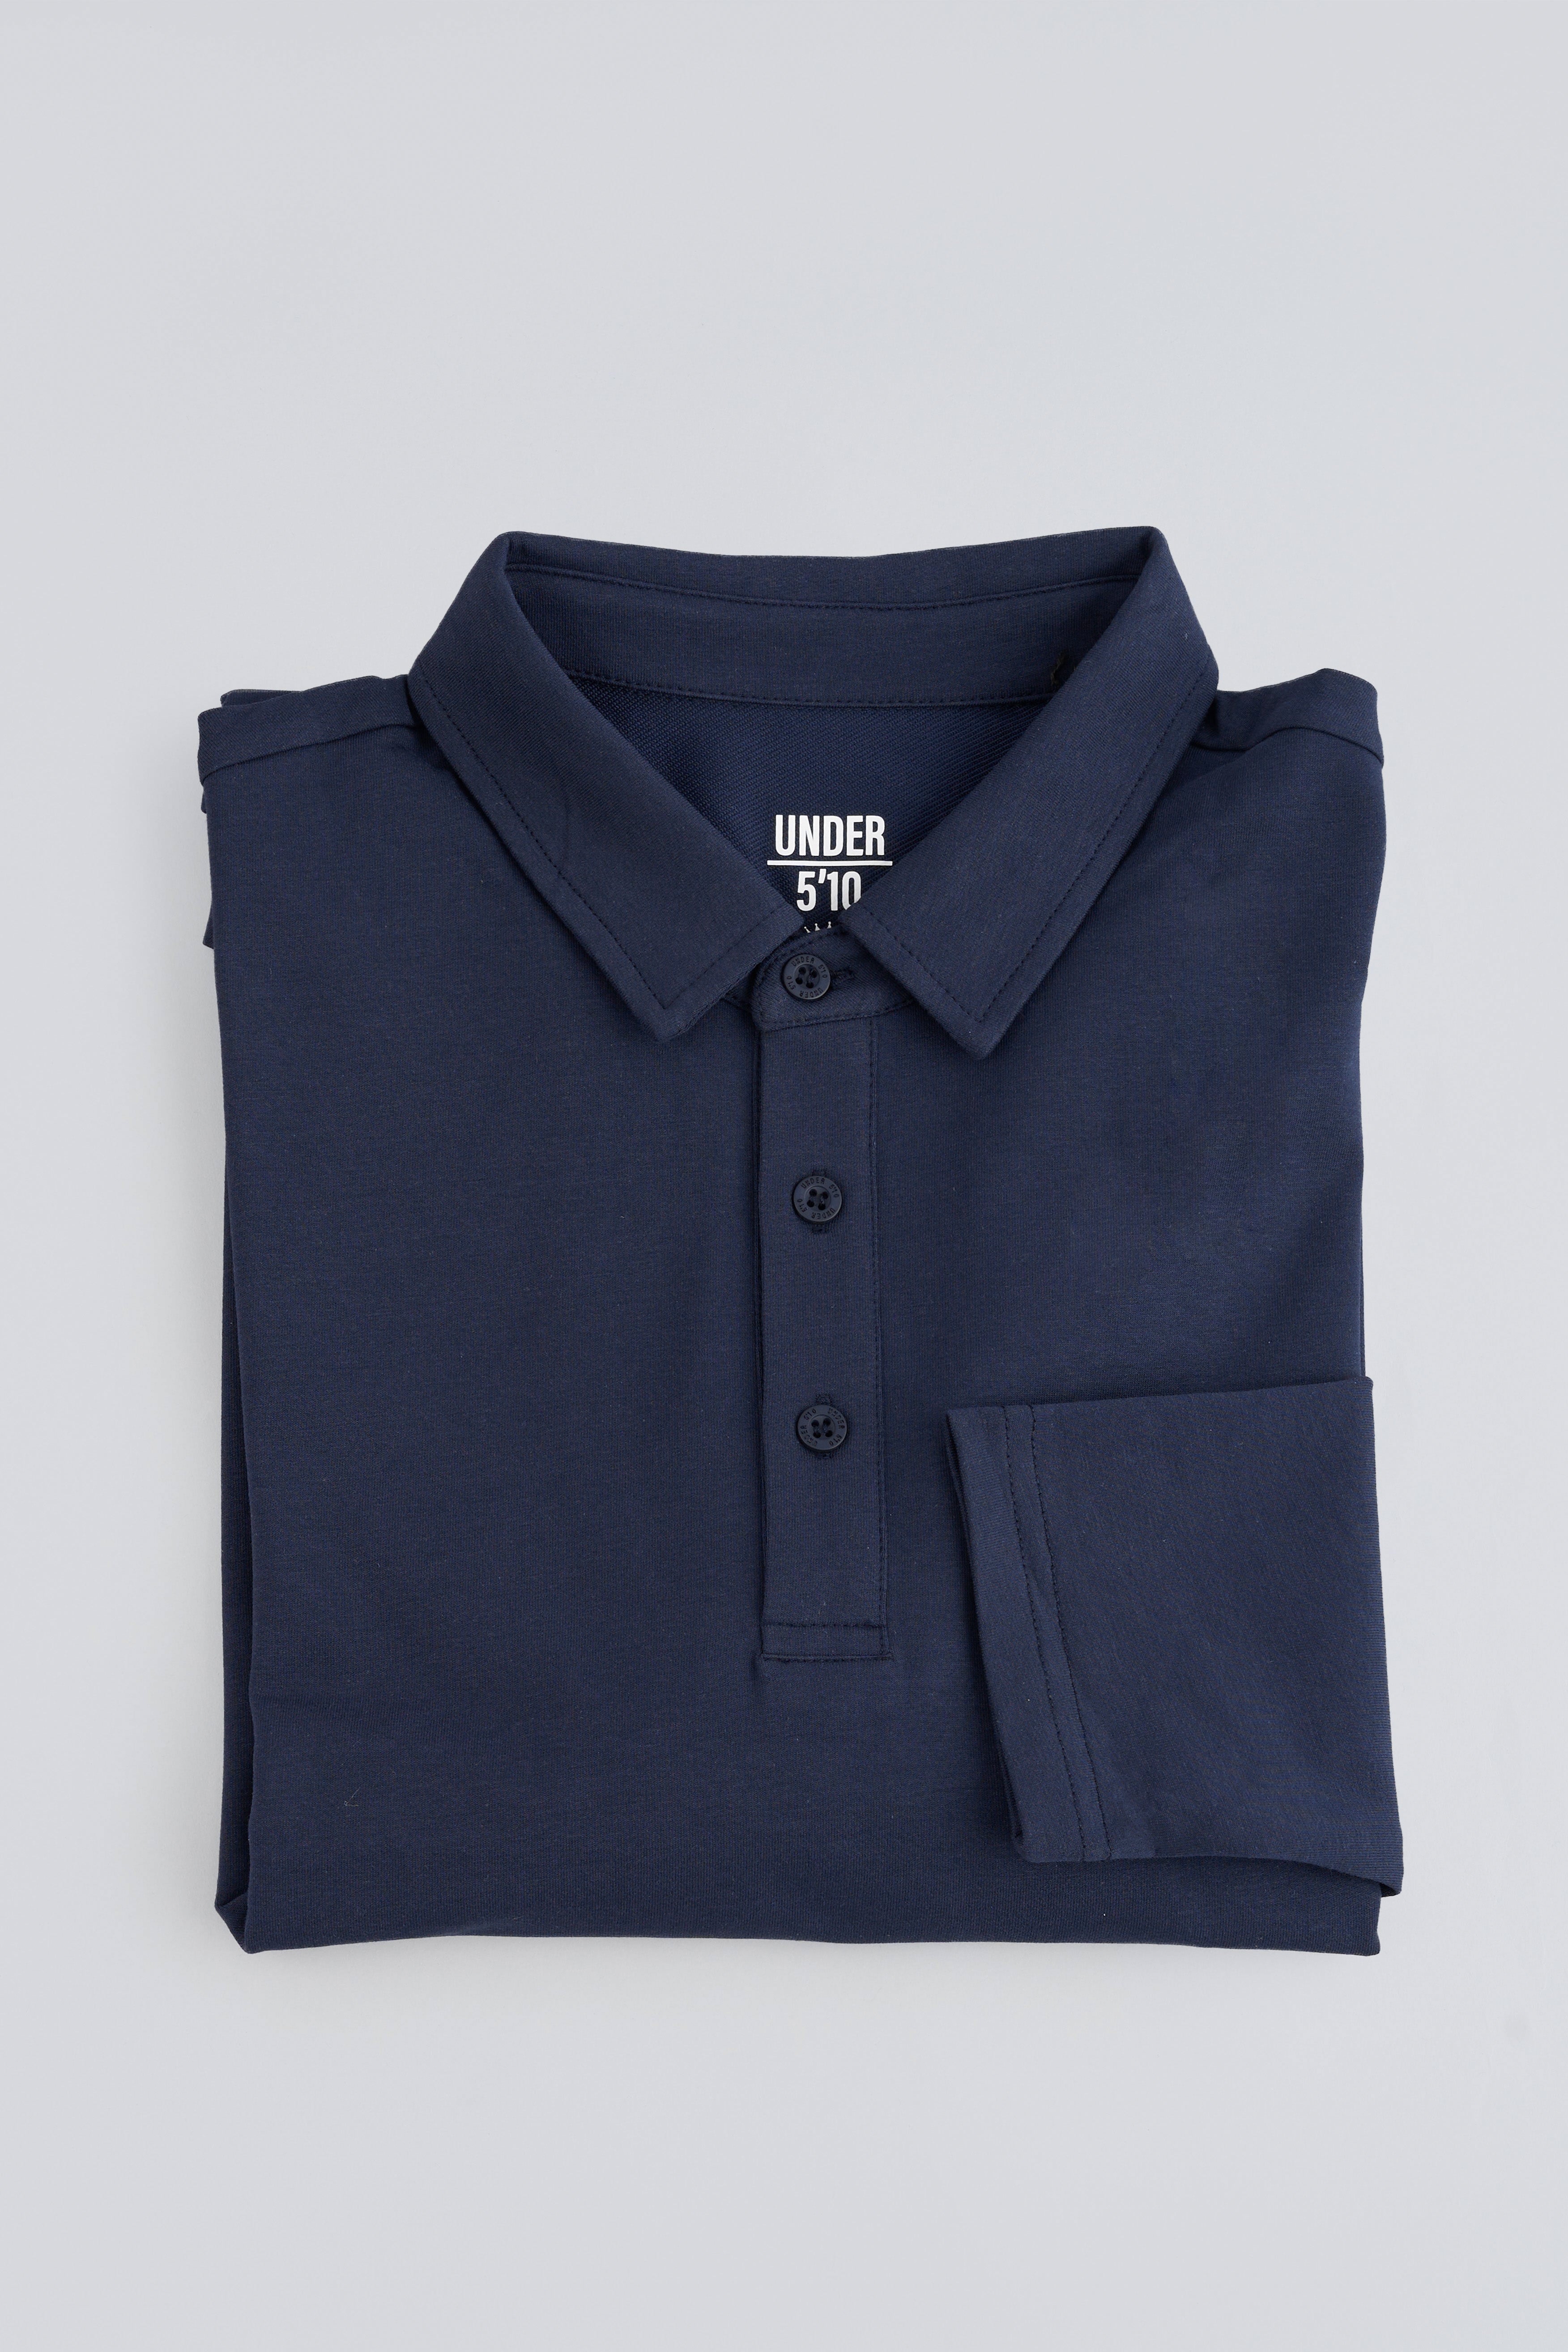 Long Sleeve Athletic Blend Polo Navy